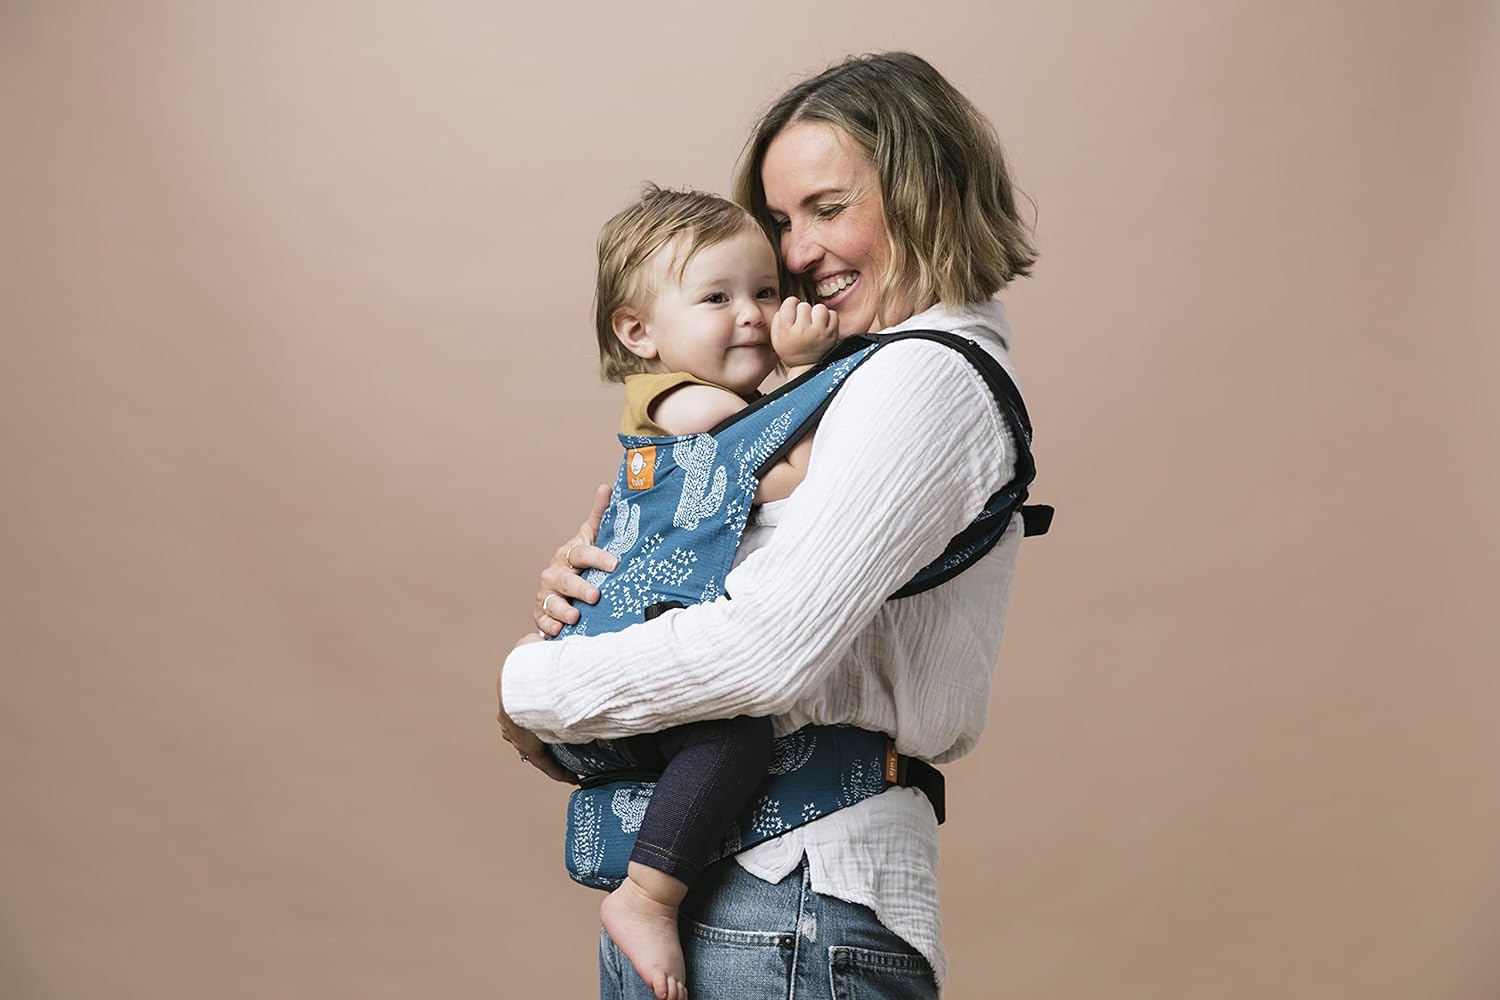 Tula Lite Baby Carrier and Baby Carrier Bag in One, Lightweight, Compact, Ergonomic, Belly Carrier, Back Carrier, Travel Baby Carrier (Soar)